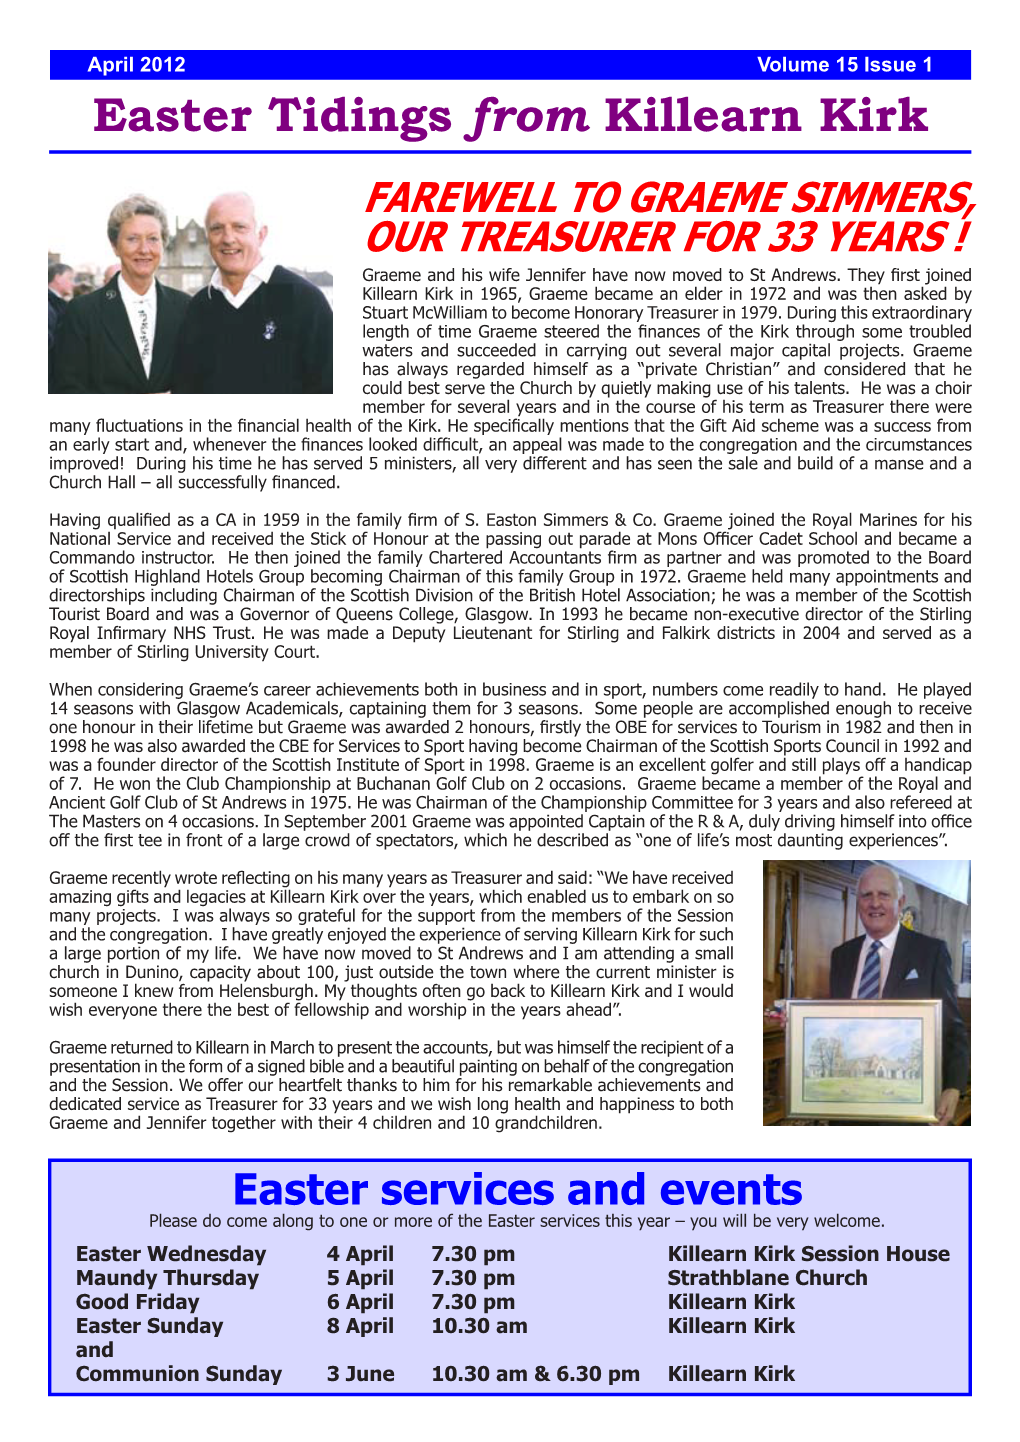 Easter Tidings from Killearn Kirk FAREWELL to GRAEME SIMMERS, OUR TREASURER for 33 YEARS ! Graeme and His Wife Jennifer Have Now Moved to St Andrews